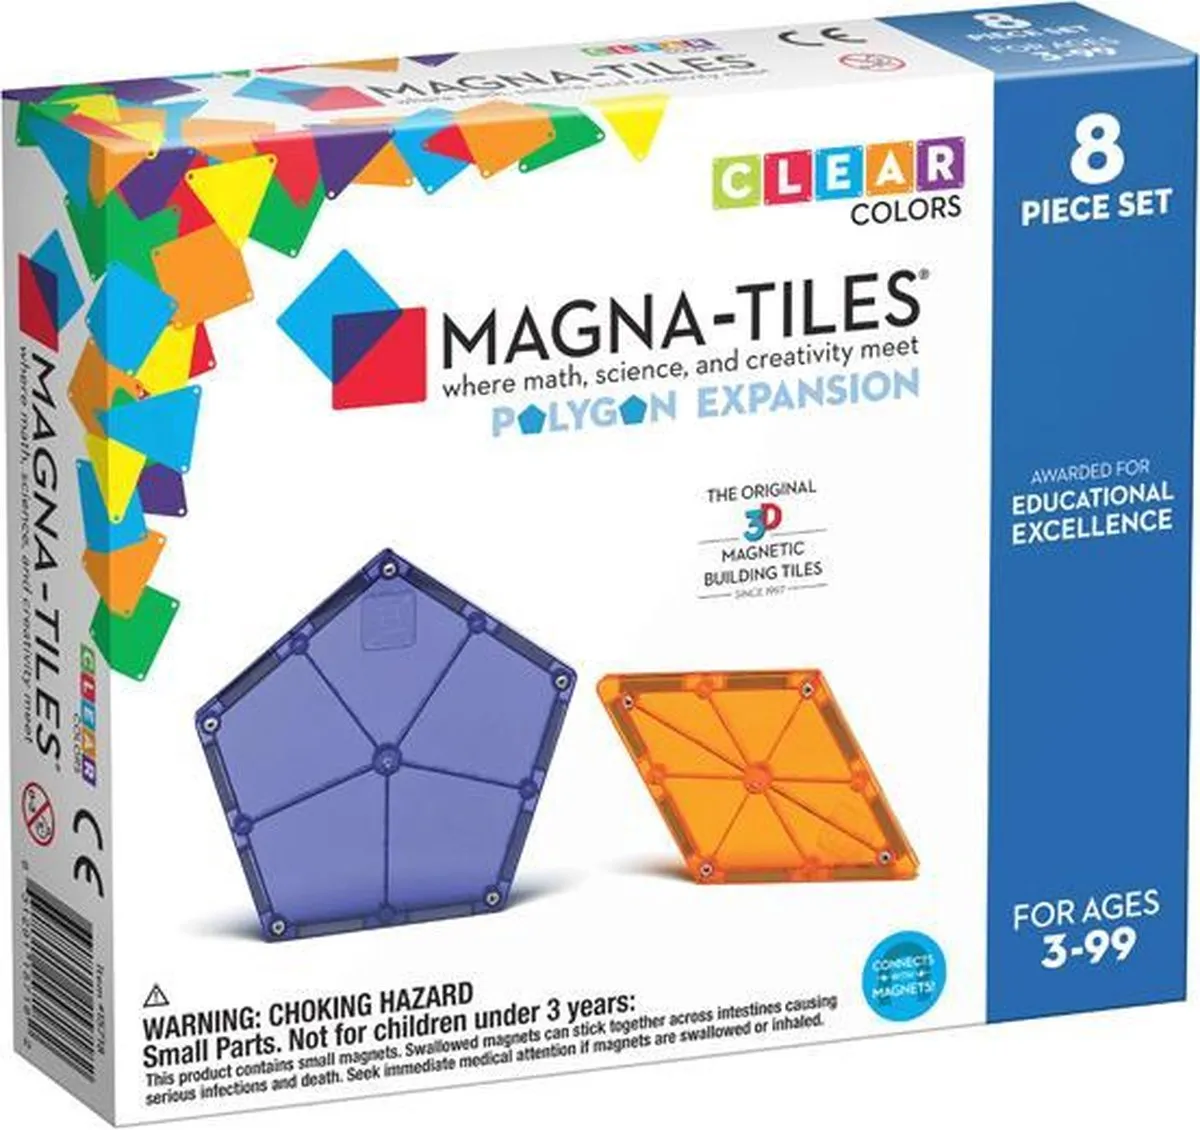 Magna-Tiles® Clear Colors Polygons Expansion Set speelgoed